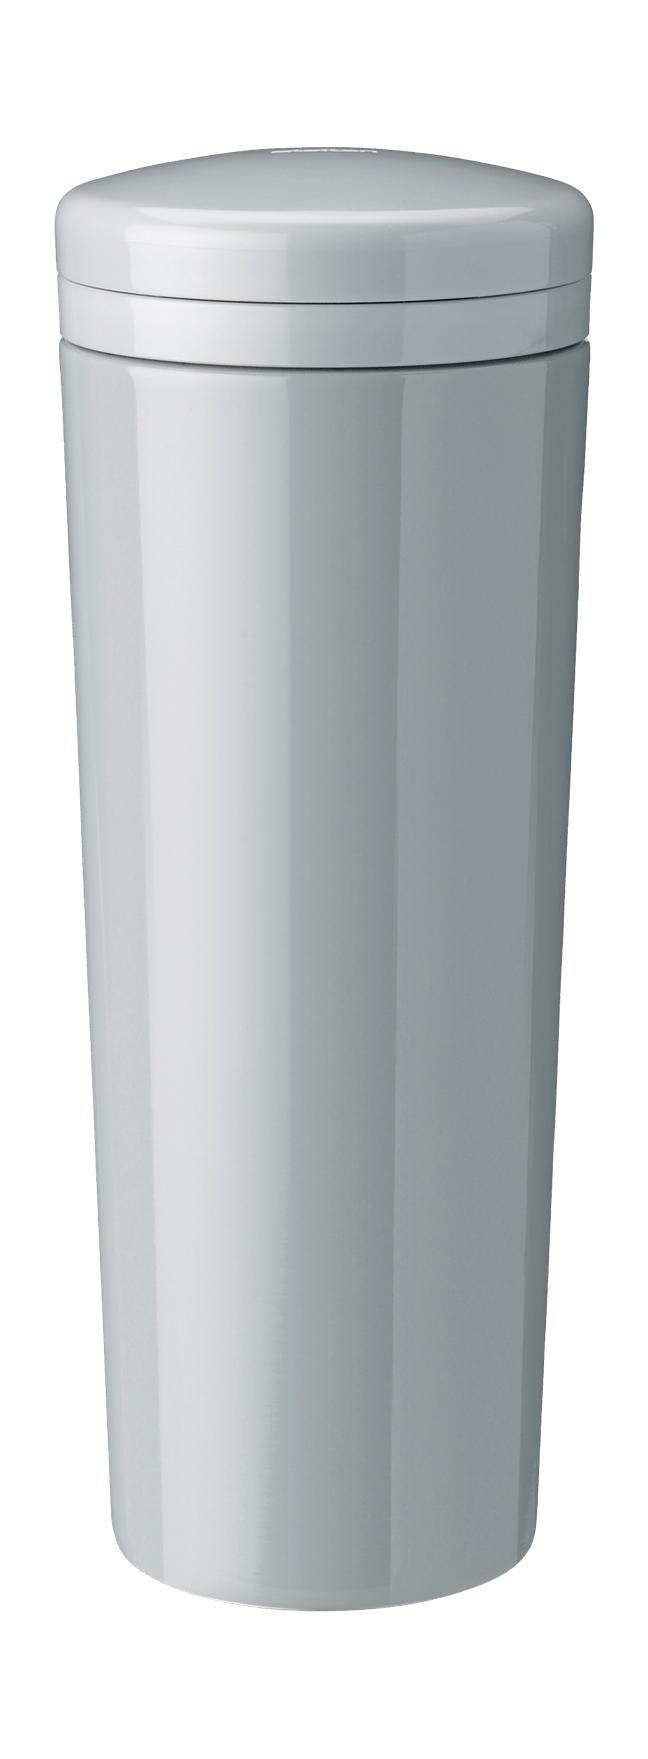 Stelton Carrie Thermos瓶0,5 L，浅灰色